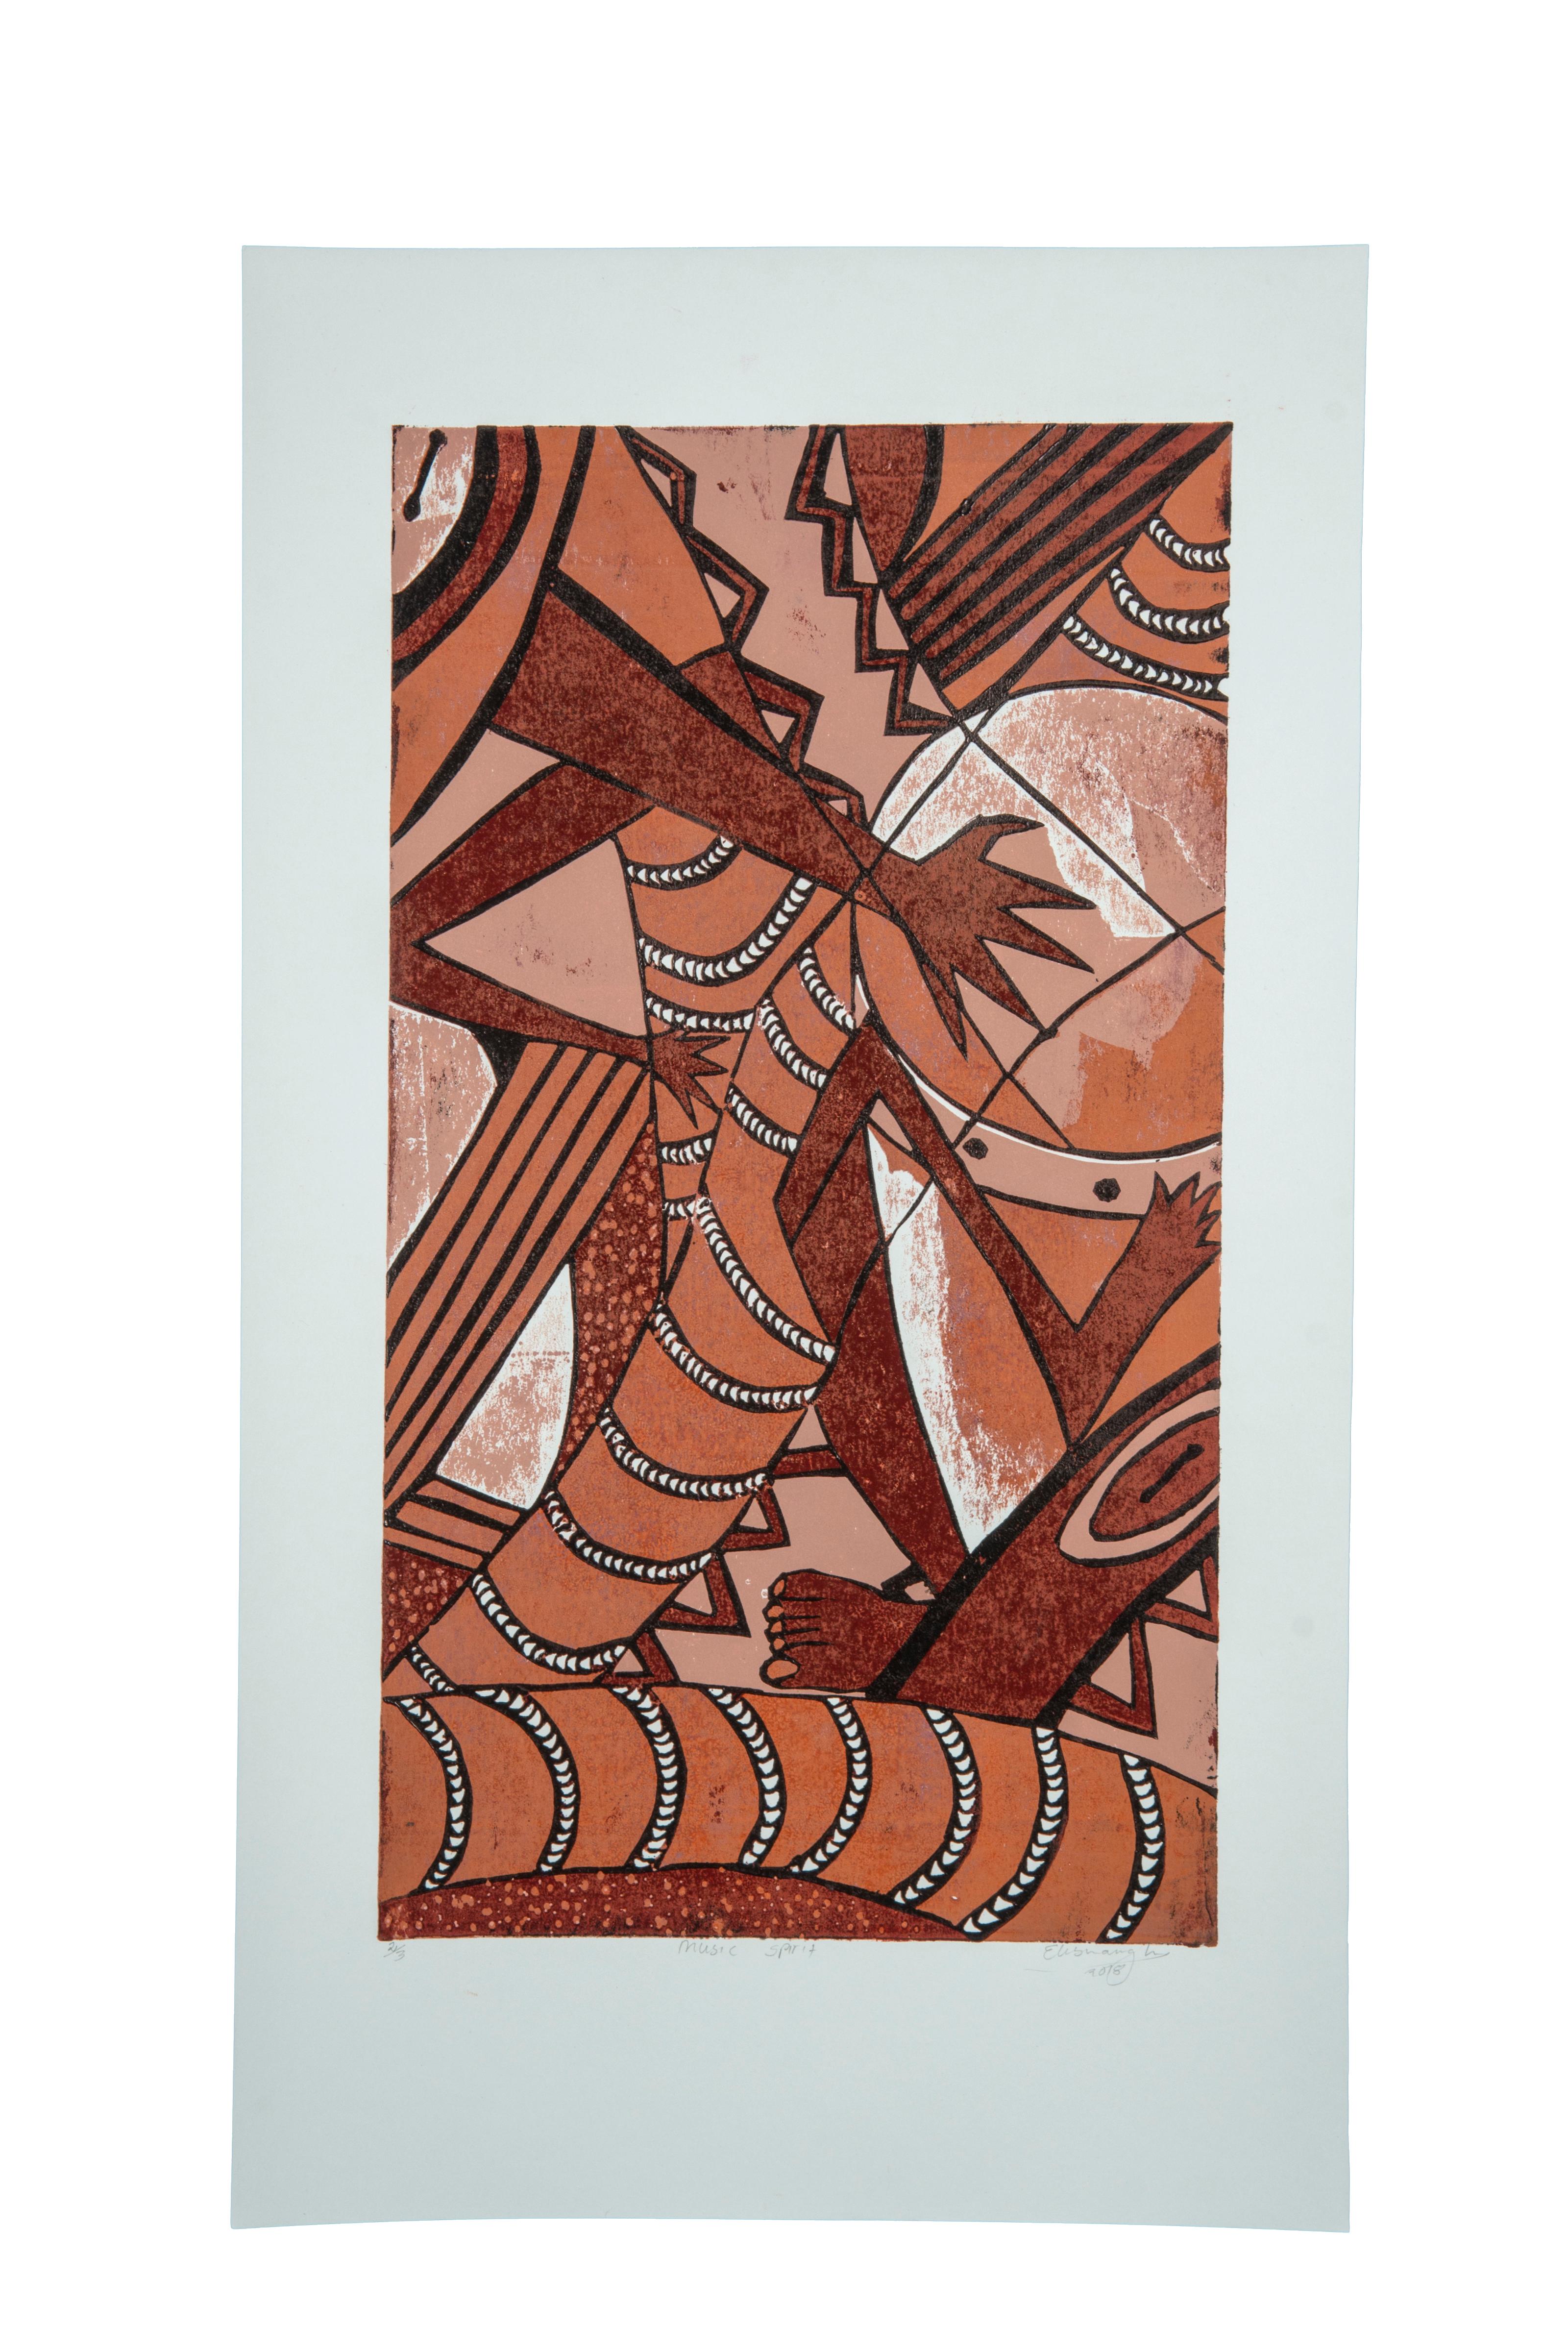 Music Spirit, 2018. Cardboard block print on paper, 2/3

Elisia Nghidishange was born in Eenhana in northern Namibia. This printmaker, sculptor and mixed media artist graduated from the College of the Arts in Windhoek in 2016. Nghidishange has taken